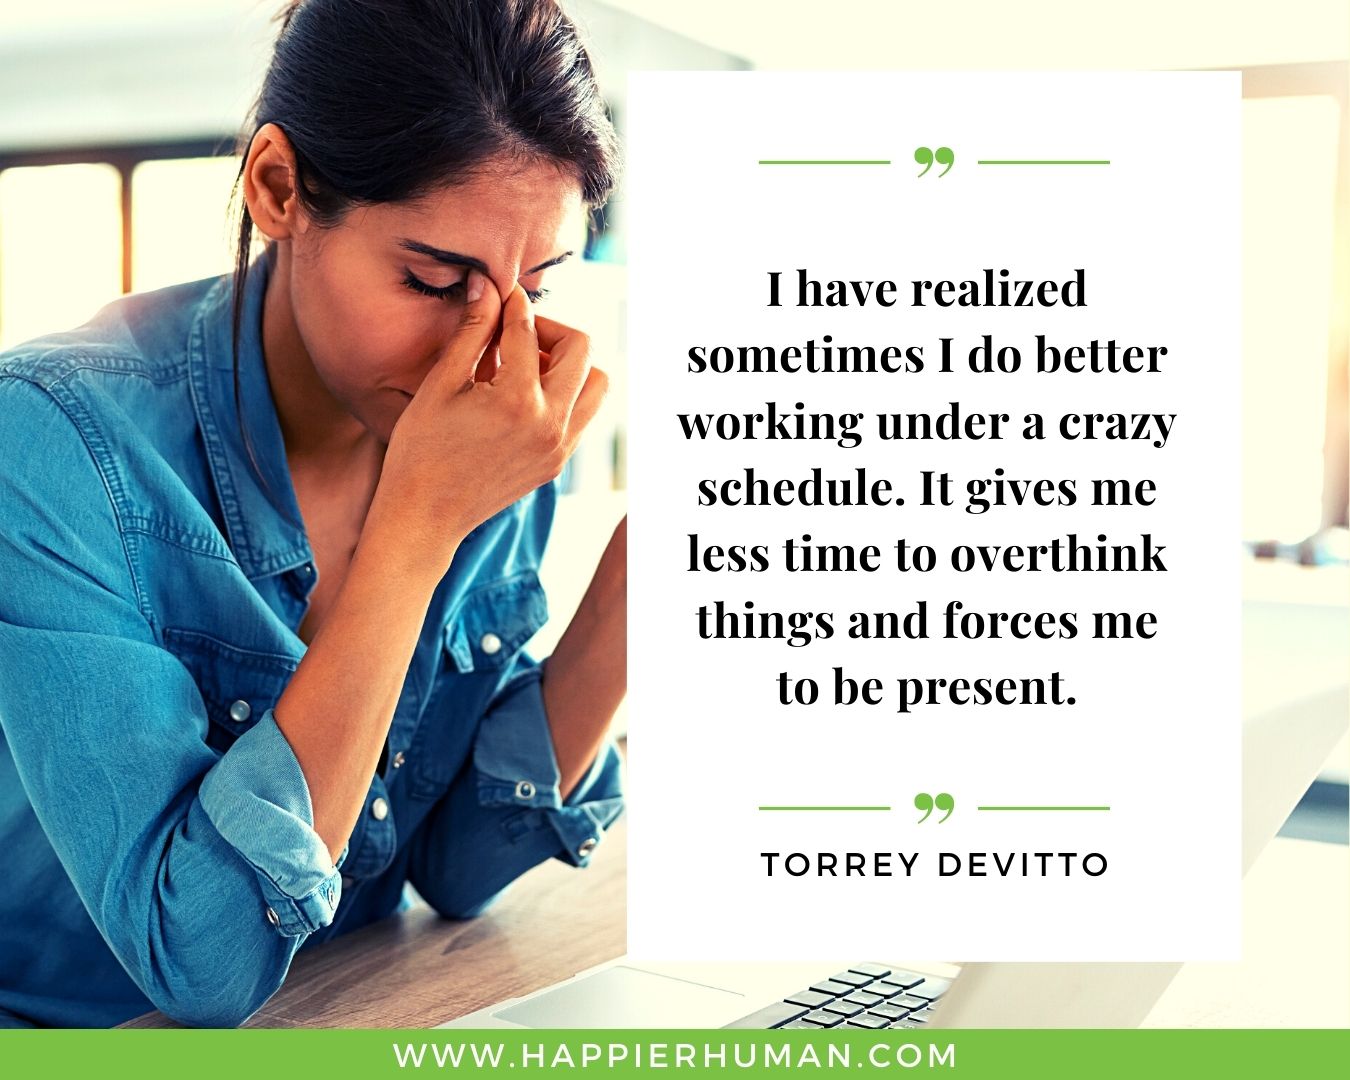 Overthinking Quotes - “I have realized sometimes I do better working under a crazy schedule. It gives me less time to overthink things and forces me to be present.” - Torrey DeVitto